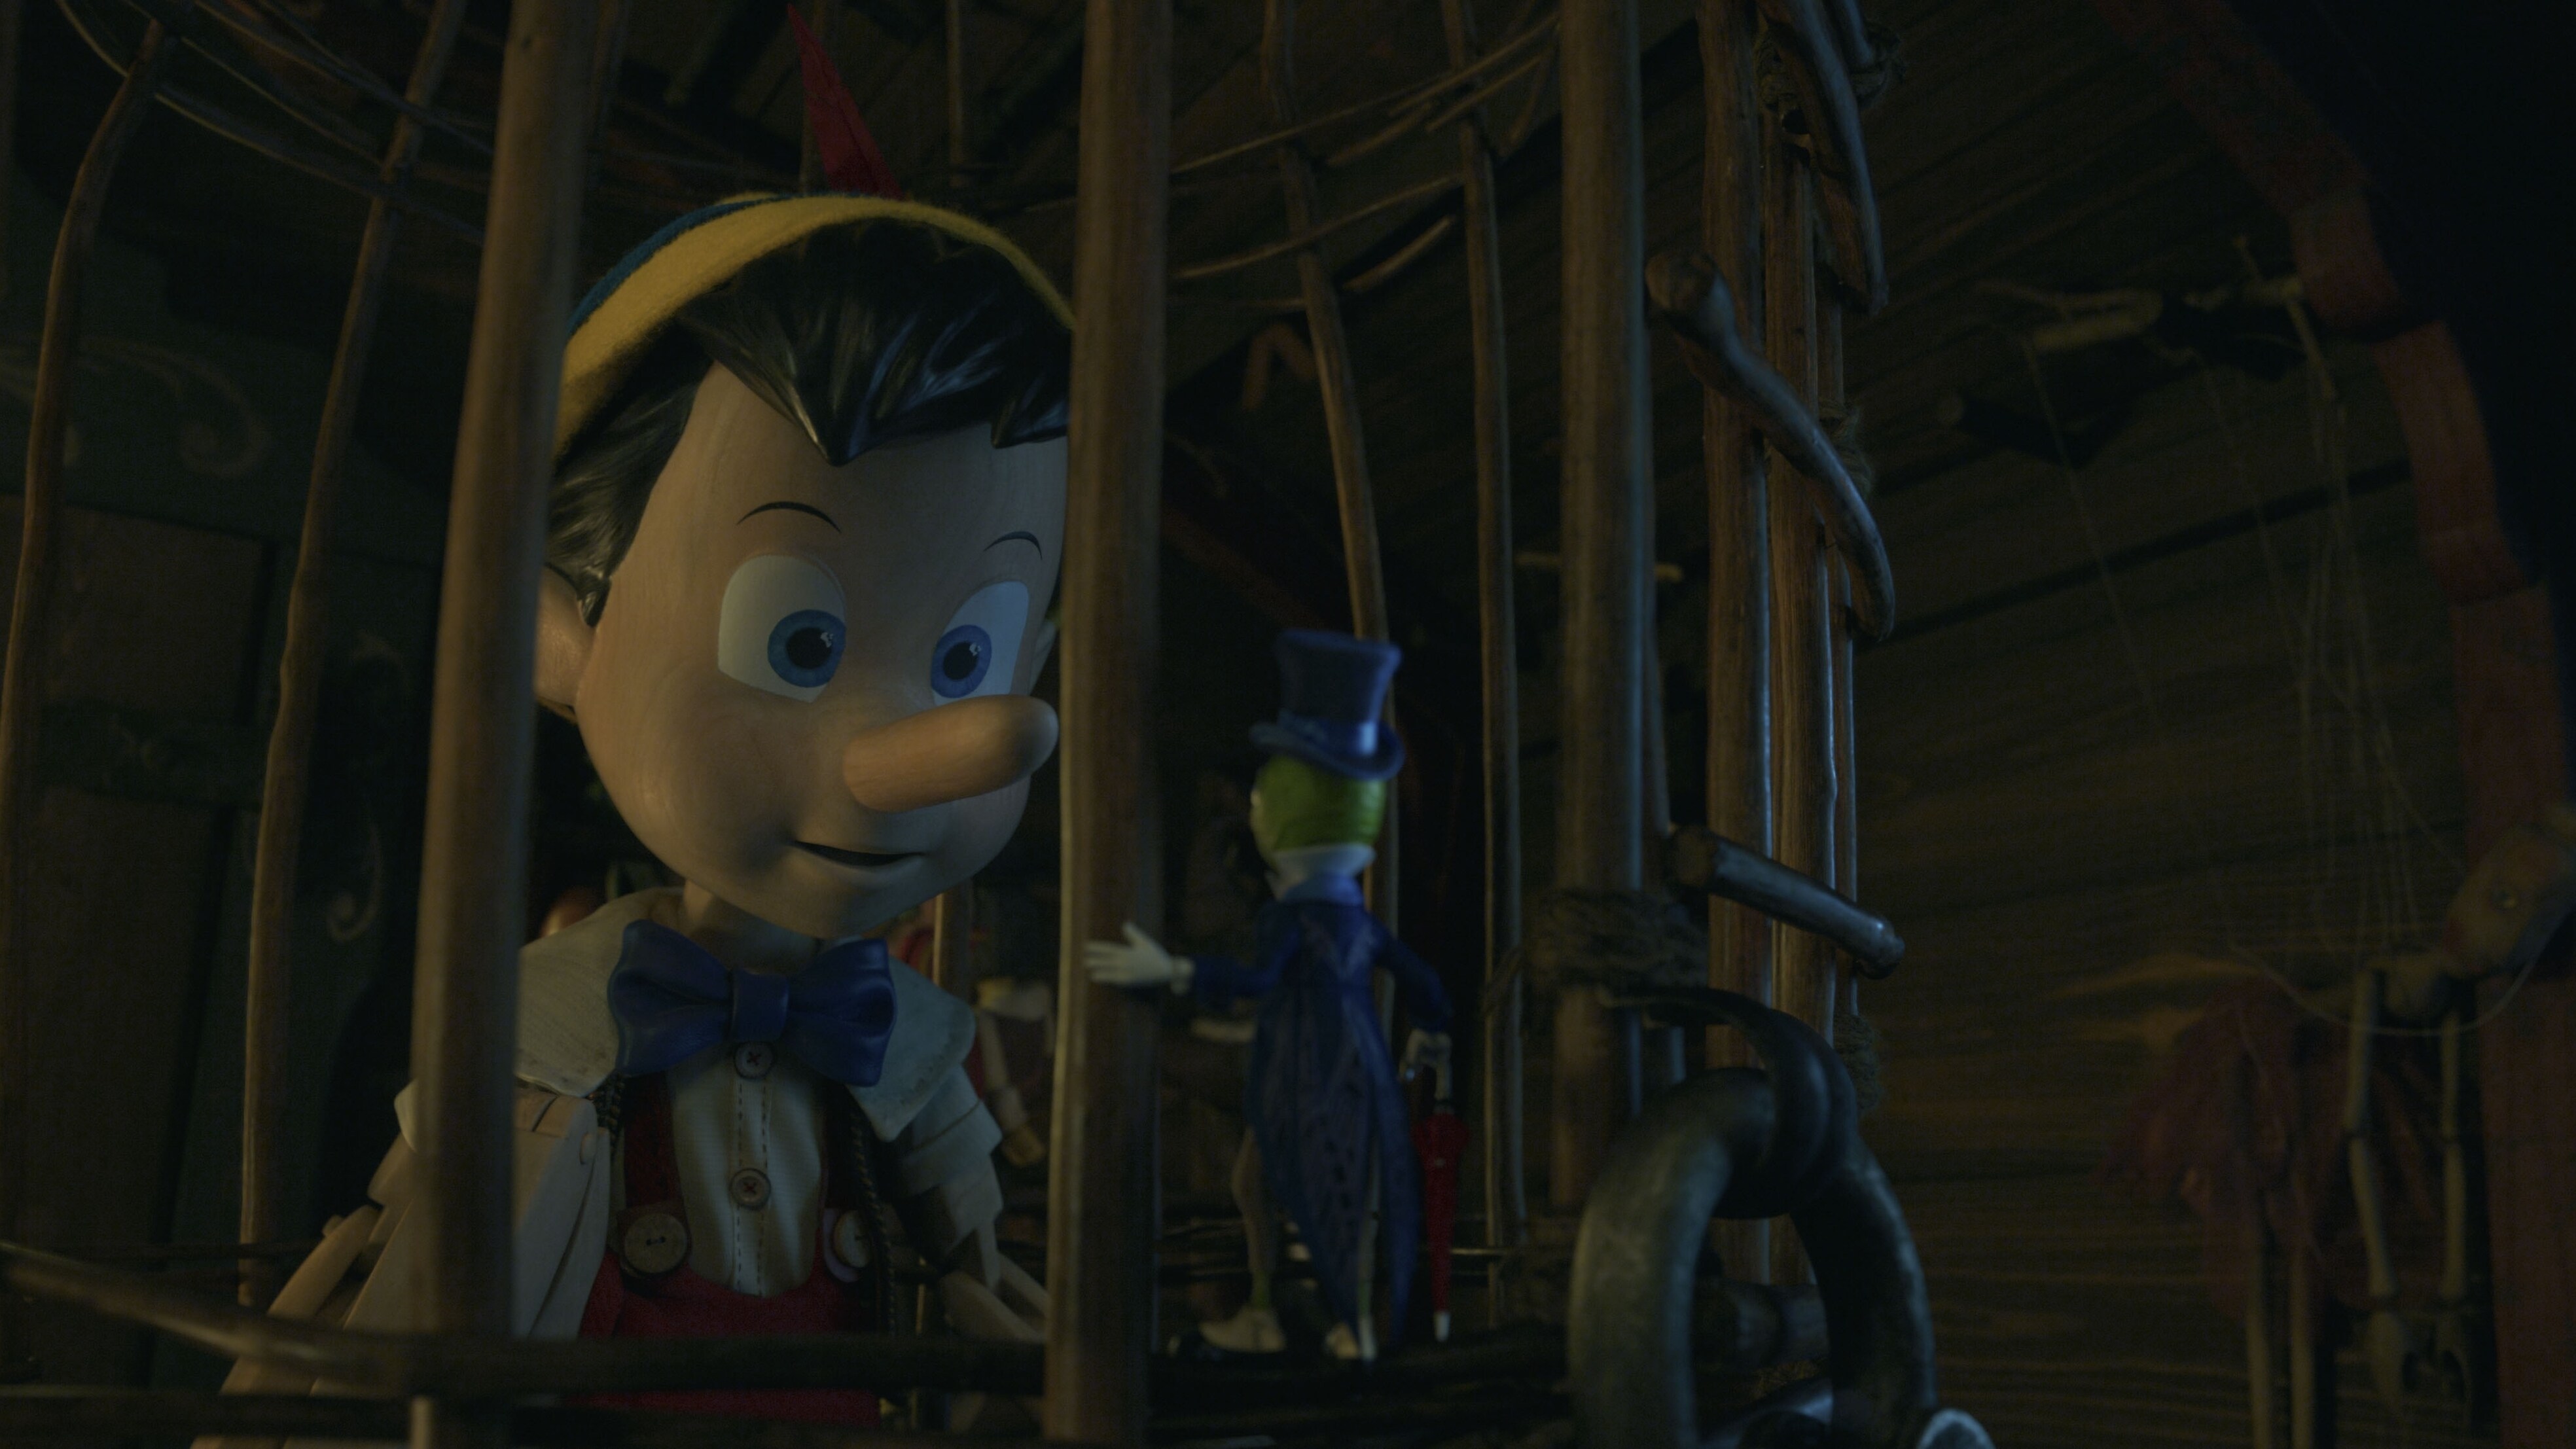 (L-R): Pinocchio (voiced by Benjamin Evan Ainsworth) and Jiminy Cricket (voiced by Joseph Gordon-Levitt) in Disney's live-action PINOCCHIO, exclusively on Disney+. Photo courtesy of Disney Enterprises, Inc. © 2022 Disney Enterprises, Inc. All Rights Reserved.